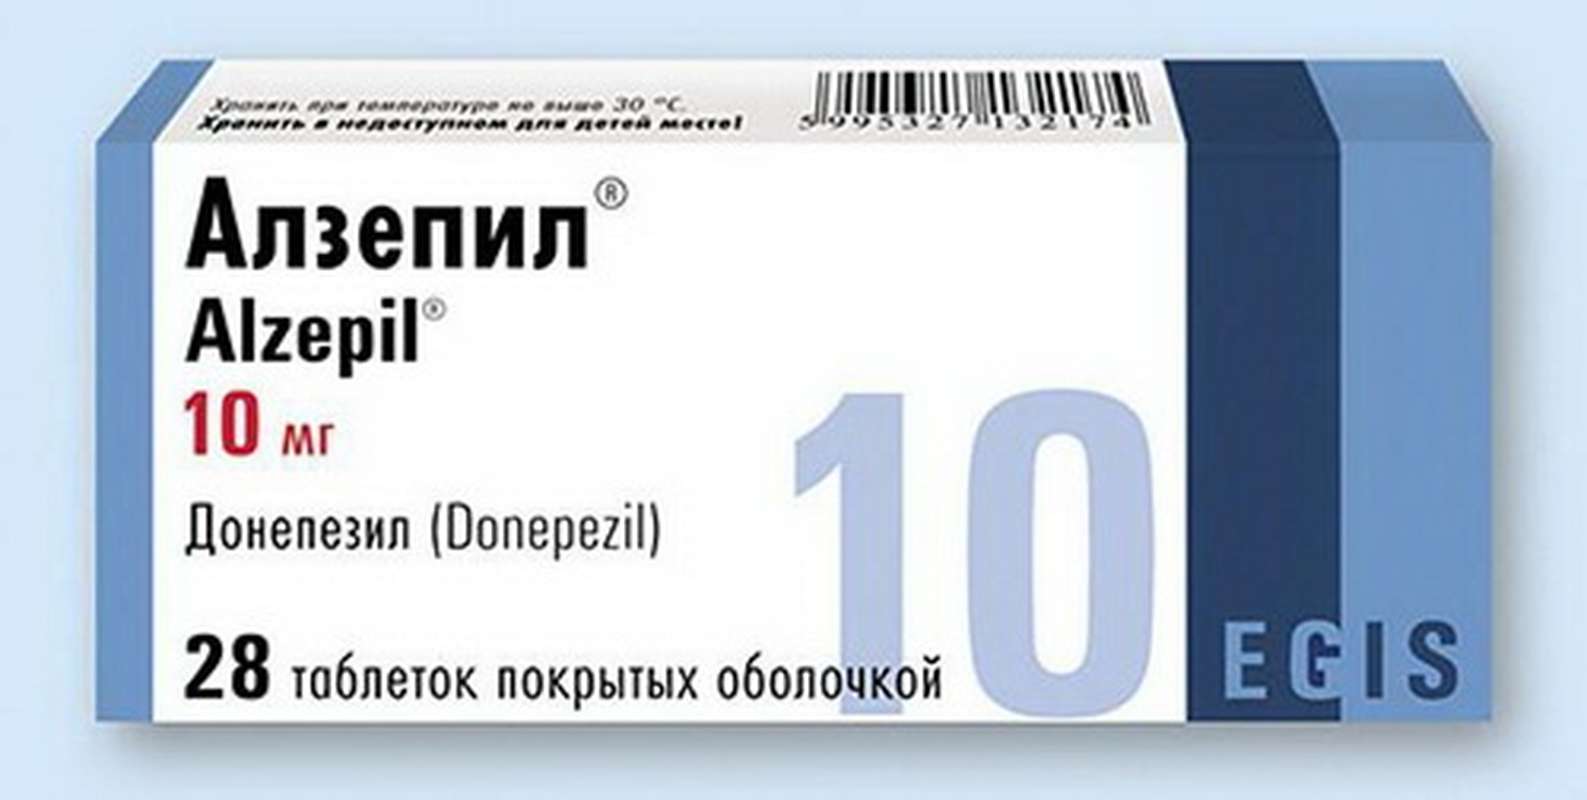 Alzepil 10mg 28 pills buy treatment of dementia symptoms with Alzheimer's disease online